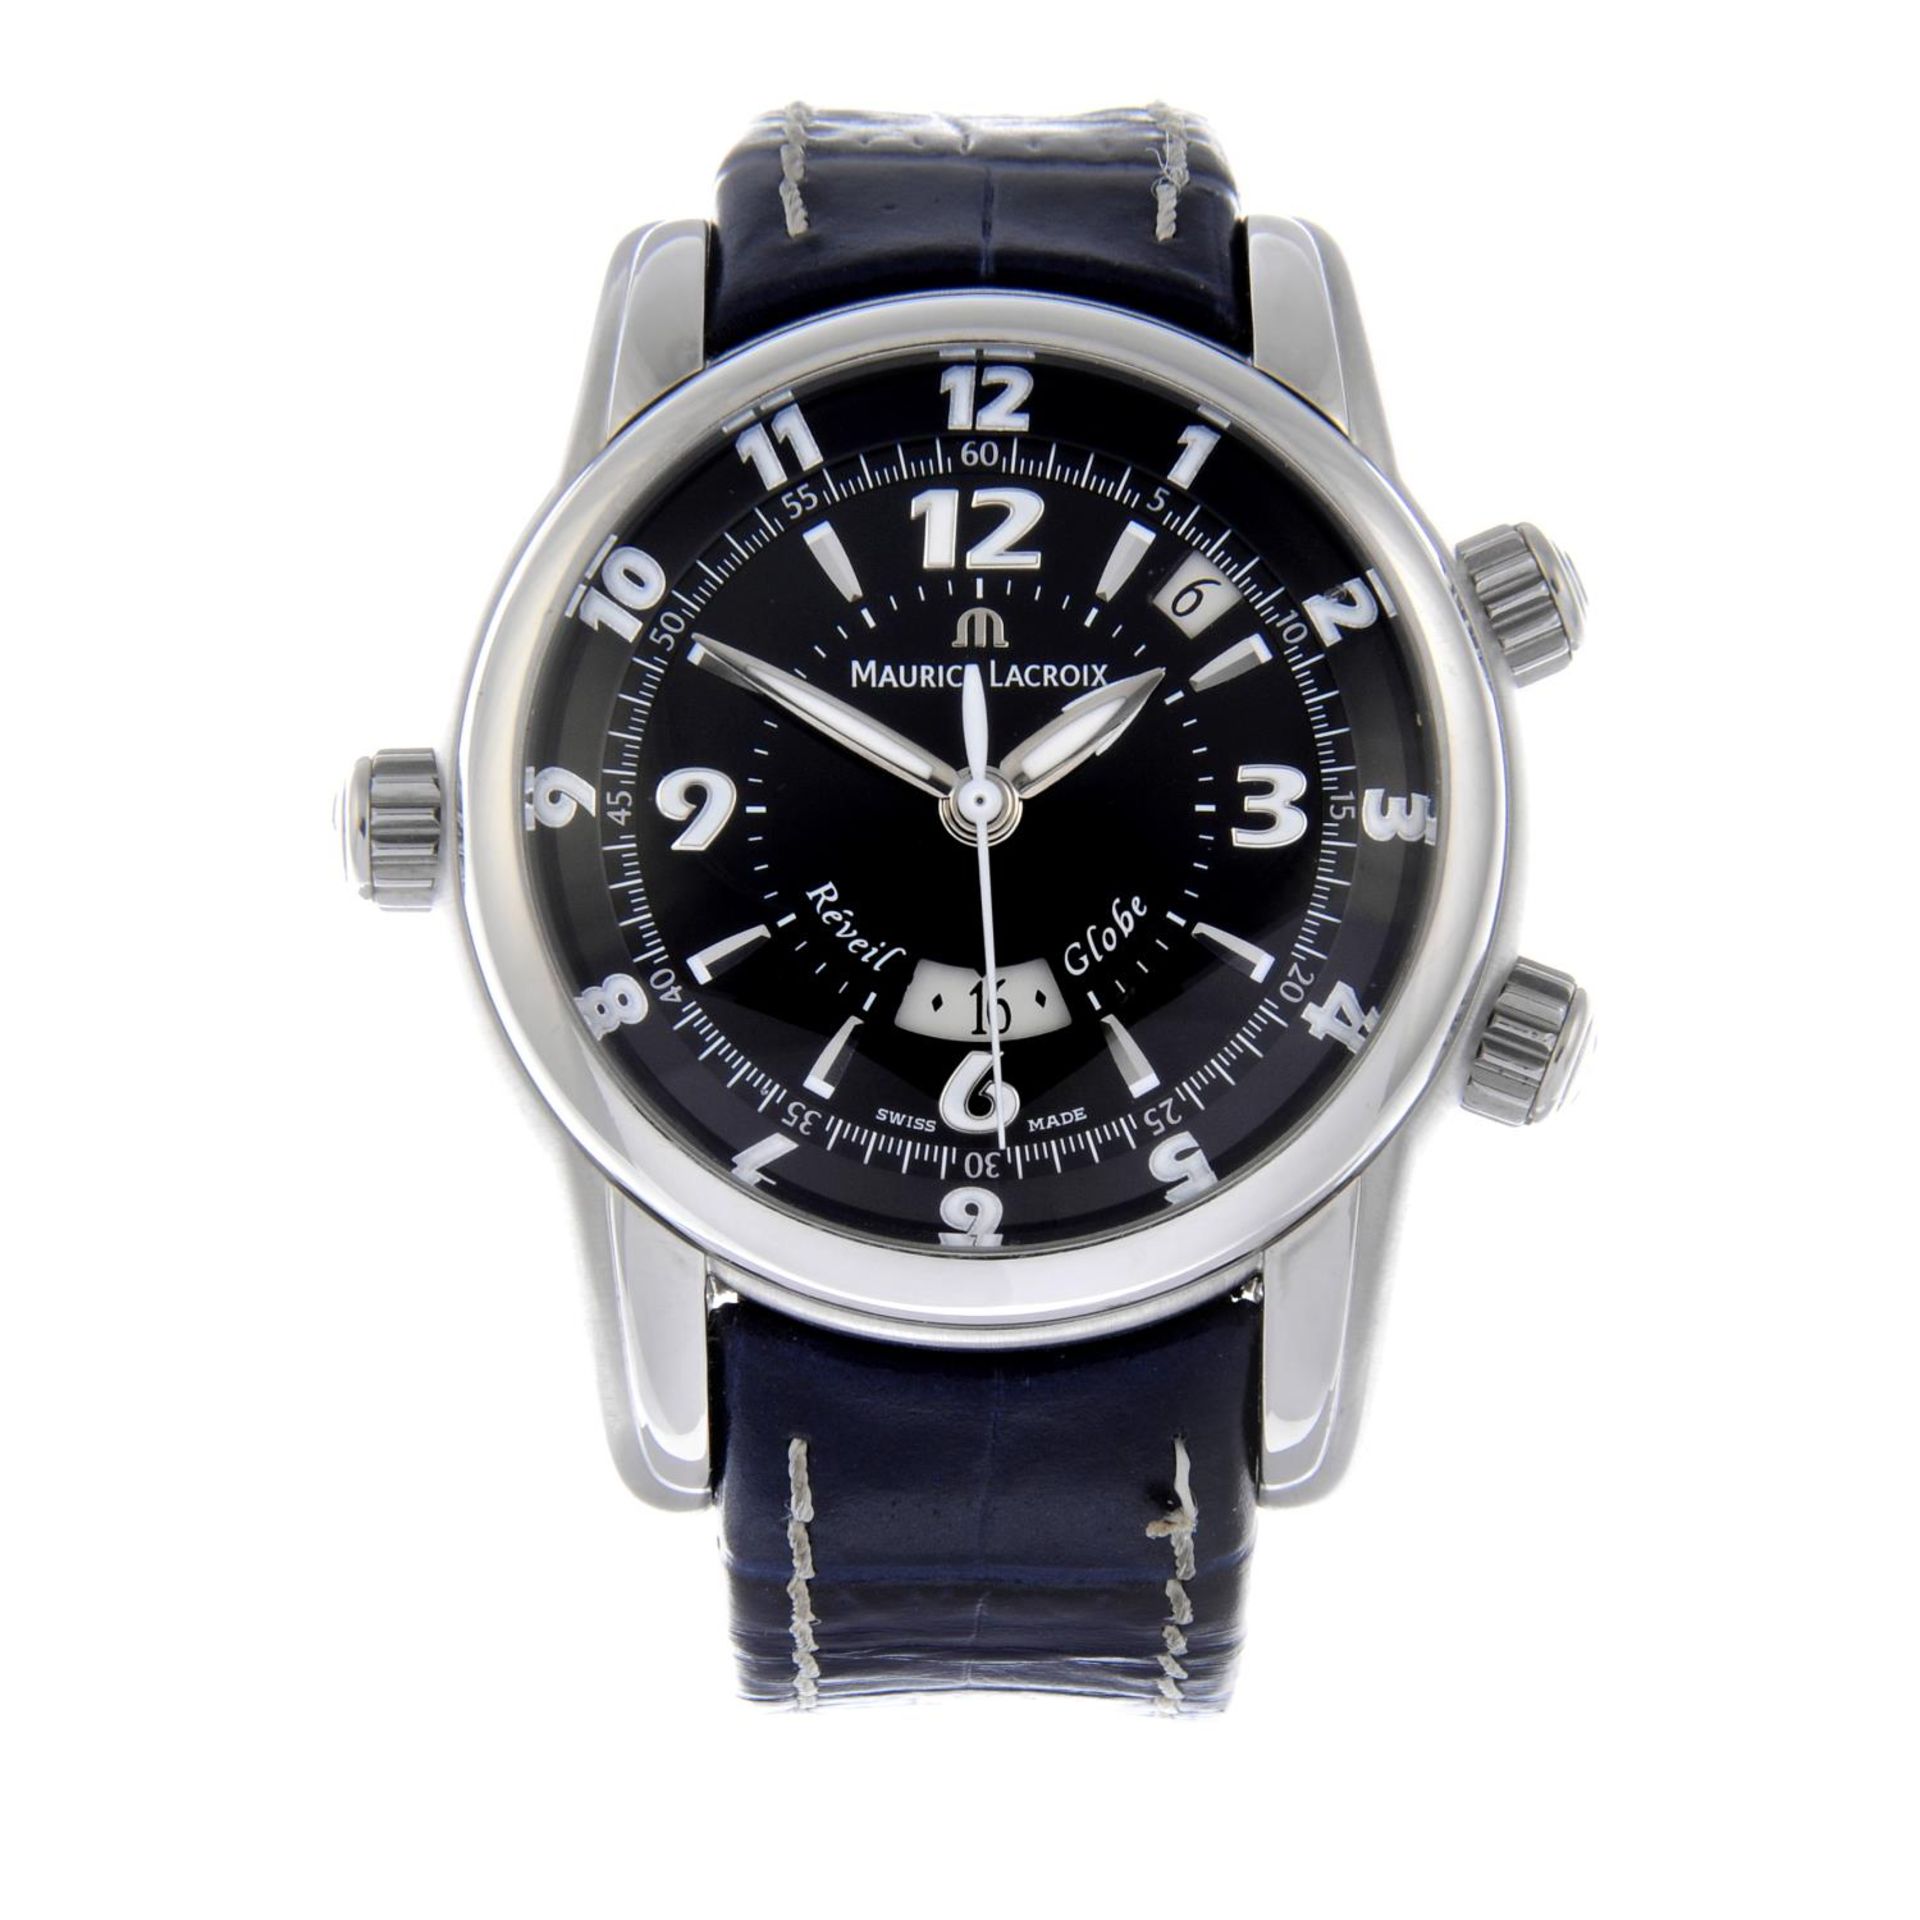 MAURICE LACROIX - a gentleman's Réveil Globe wrist watch. Stainless steel case with exhibition